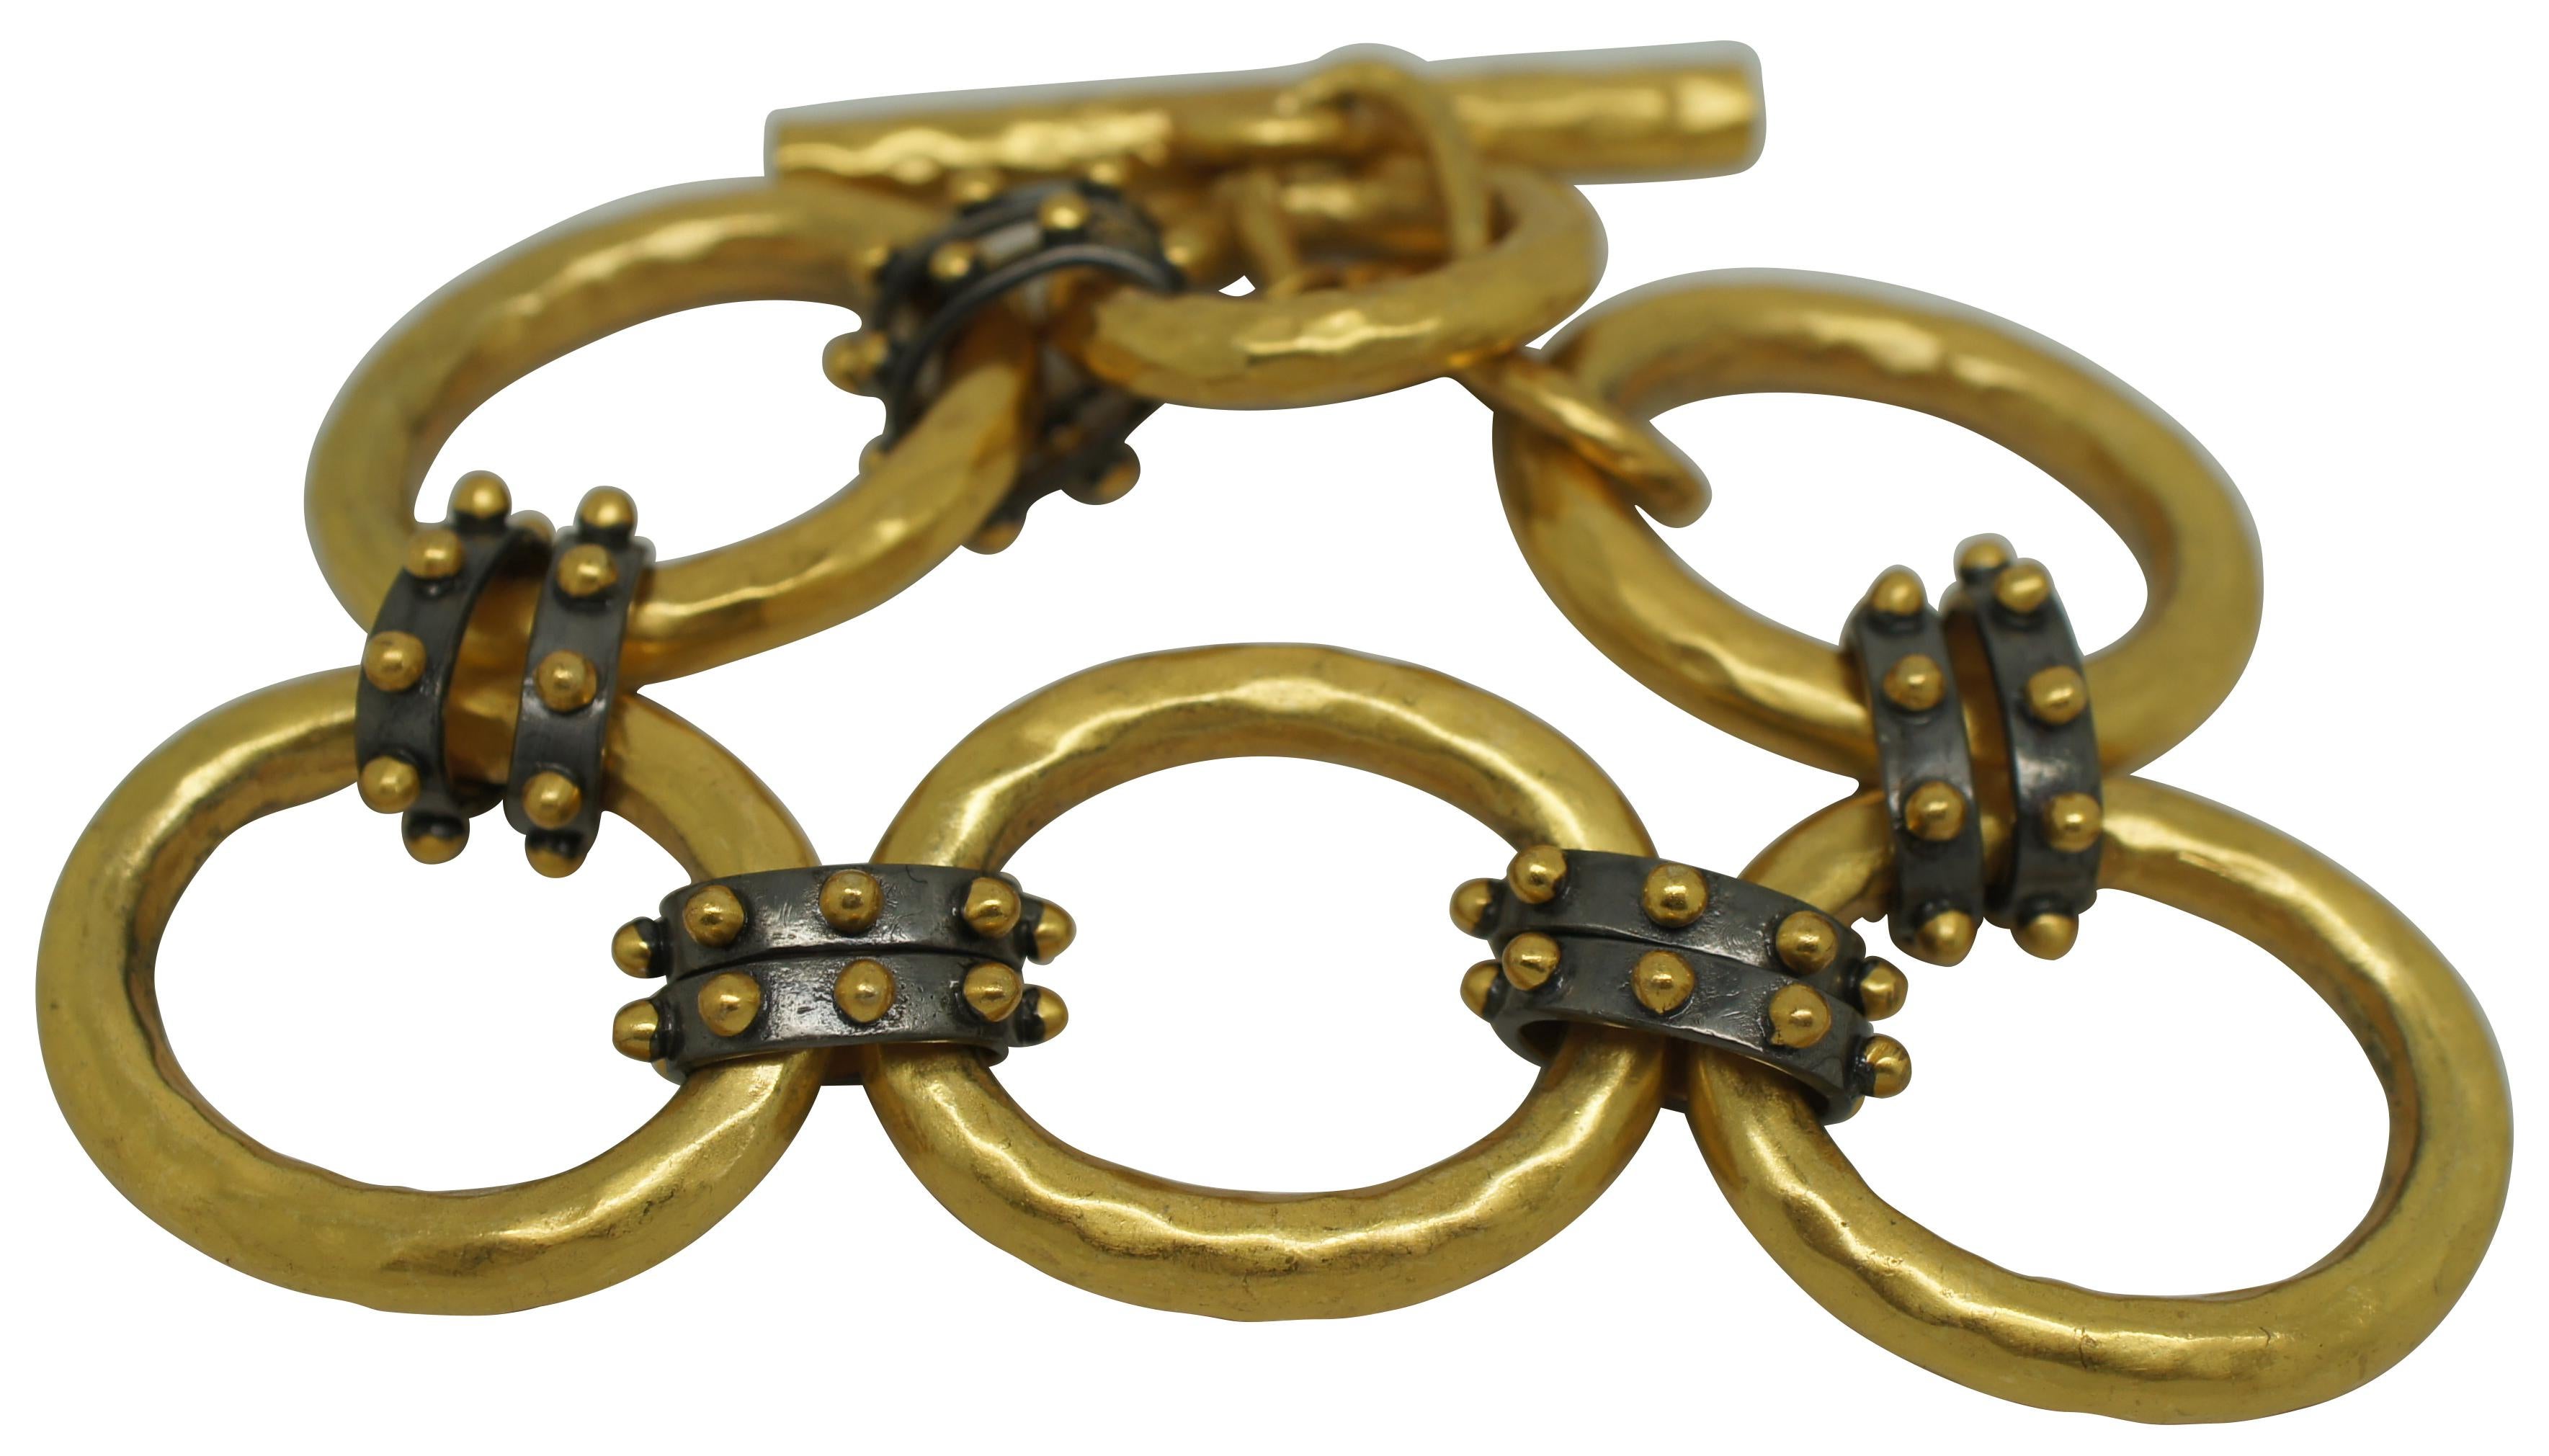 Vintage SoHo Link Bracelet by Julie Vos, featuring lightly hammered 24K gold plated oval chain links connected with dark studded connecting links. Toggle clasp. 

Studded mixed metal connecting links mingle with lightly hammered ovals to create a